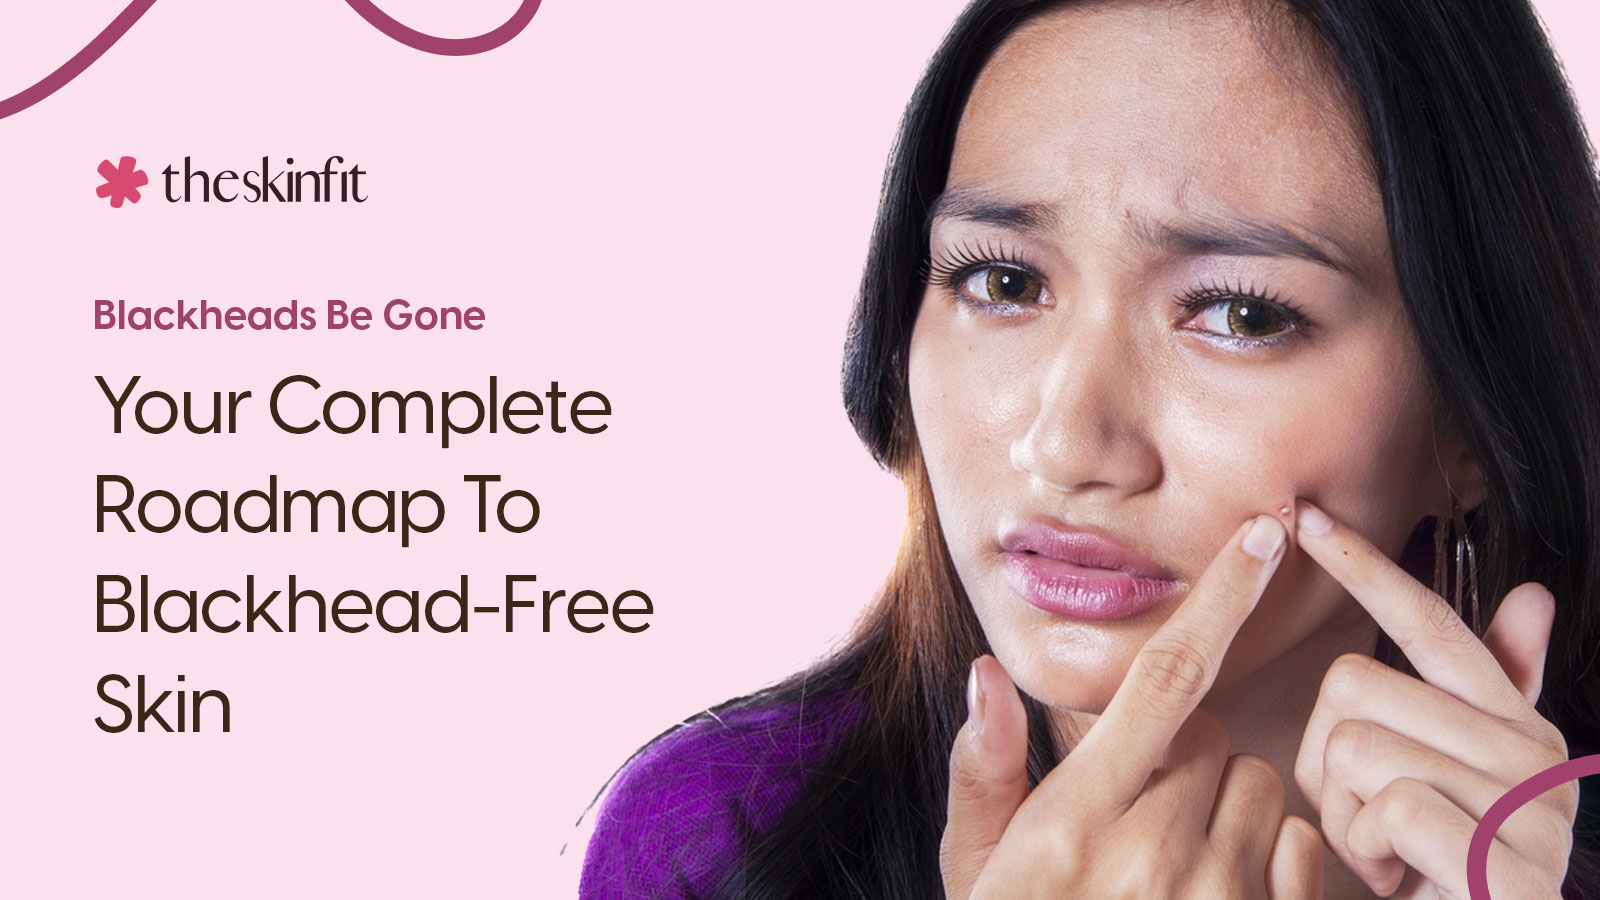 Blackheads Be Gone: Your Complete Roadmap To Blackhead-Free Skin